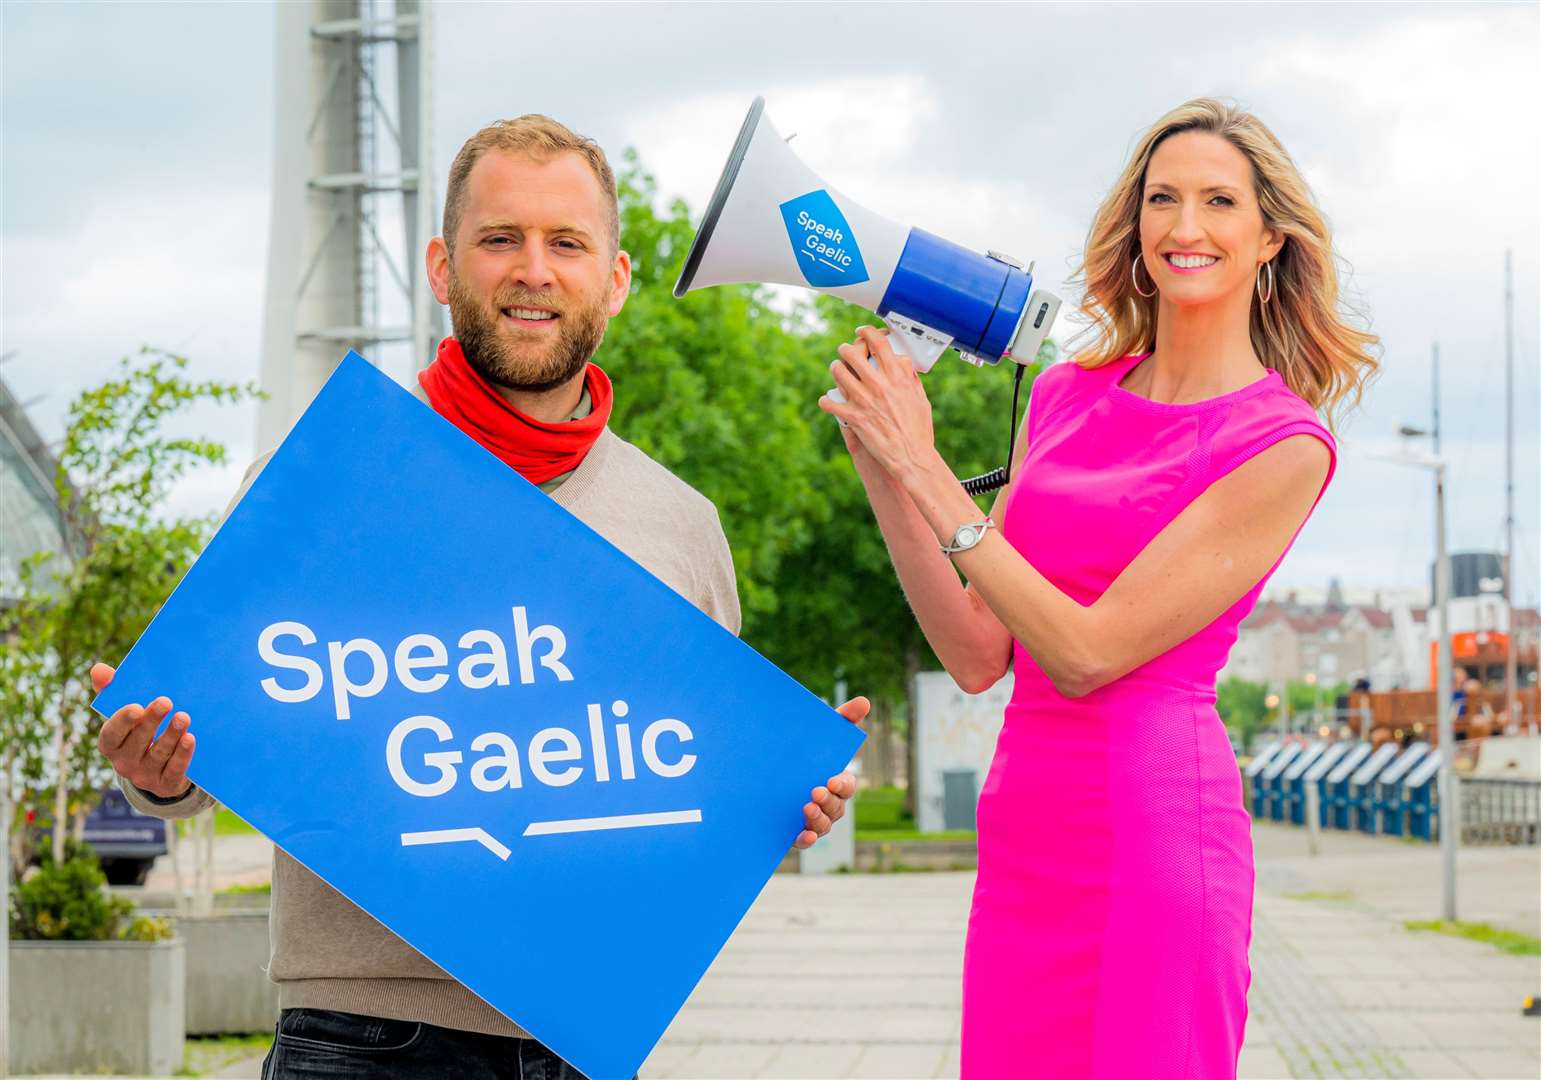 Joy Dunlop and Calum Maclean will be fronting SpeakGaelic. Picture: Alan Peebles